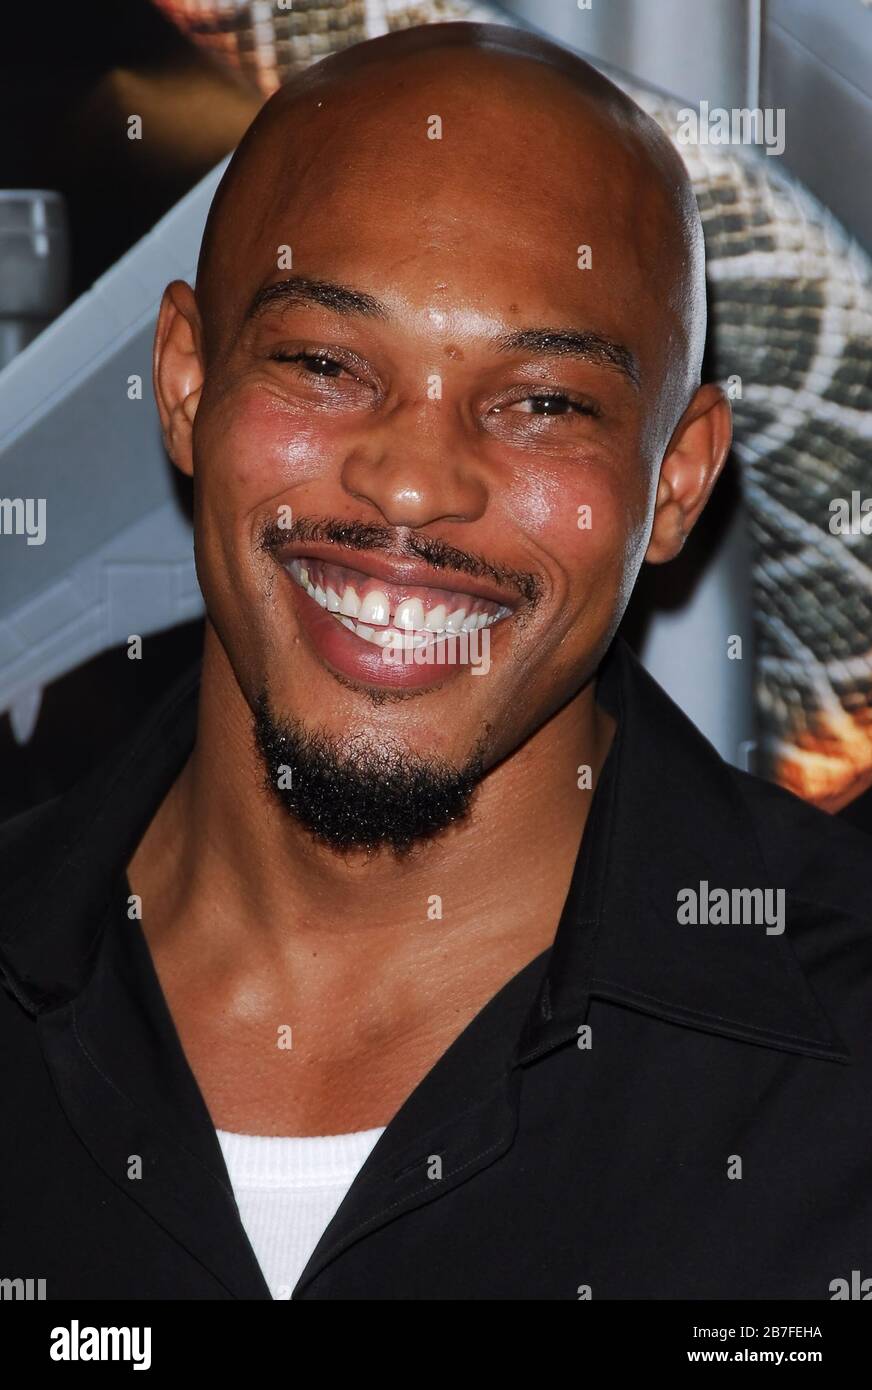 Sticky Fingaz at the Los Angeles Premiere of 'Snakes On A Plane' held at the Grauman's Chinese Theater in Hollywood, CA. The event took place on Thursday, August 17, 2006.  Photo by: SBM / PictureLux Stock Photo